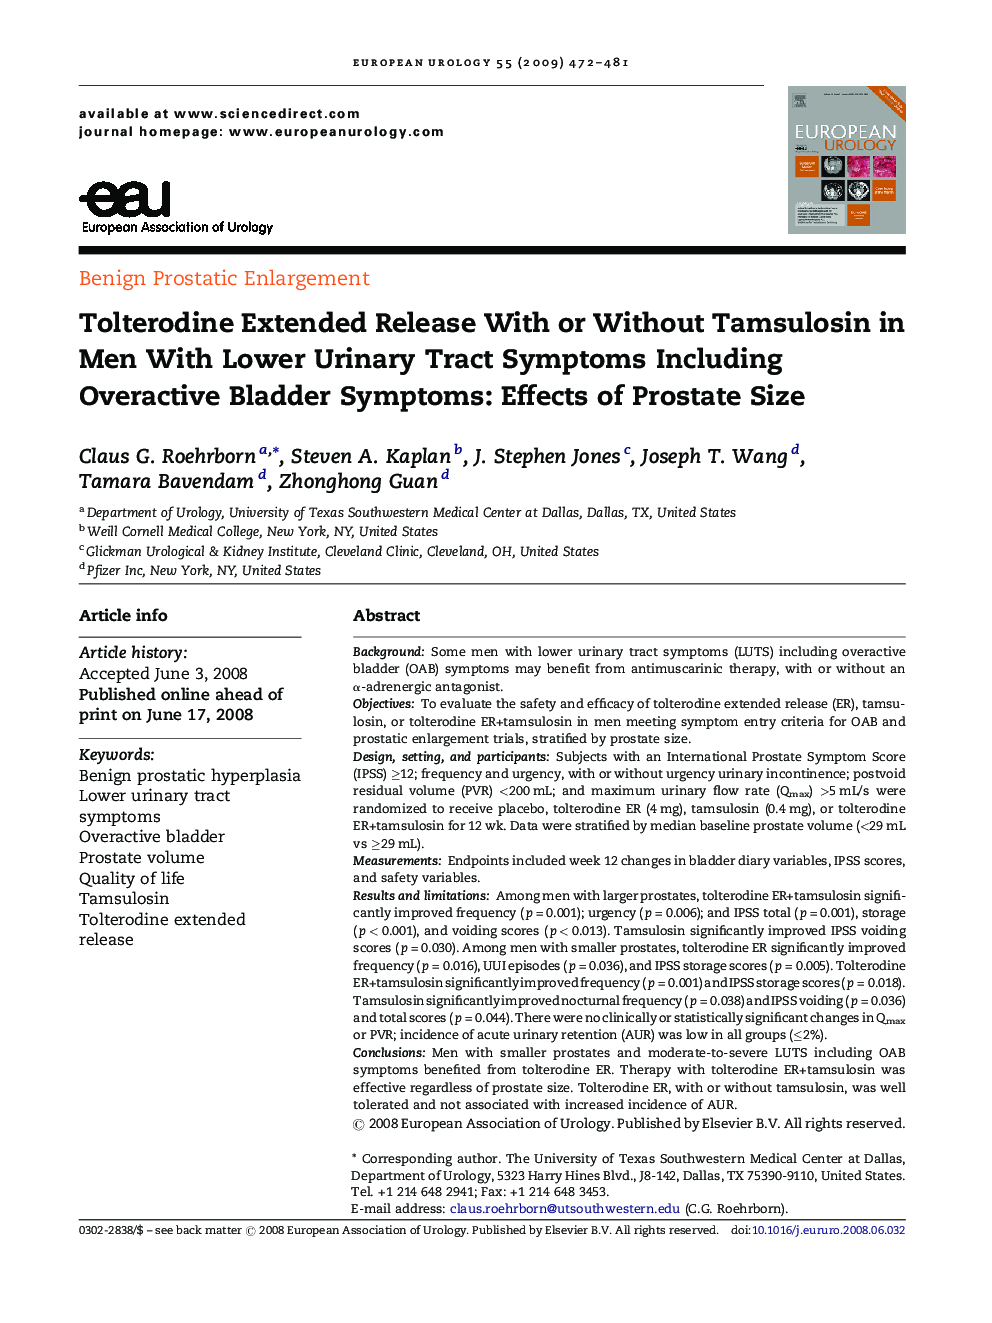 Tolterodine Extended Release With or Without Tamsulosin in Men With Lower Urinary Tract Symptoms Including Overactive Bladder Symptoms: Effects of Prostate Size